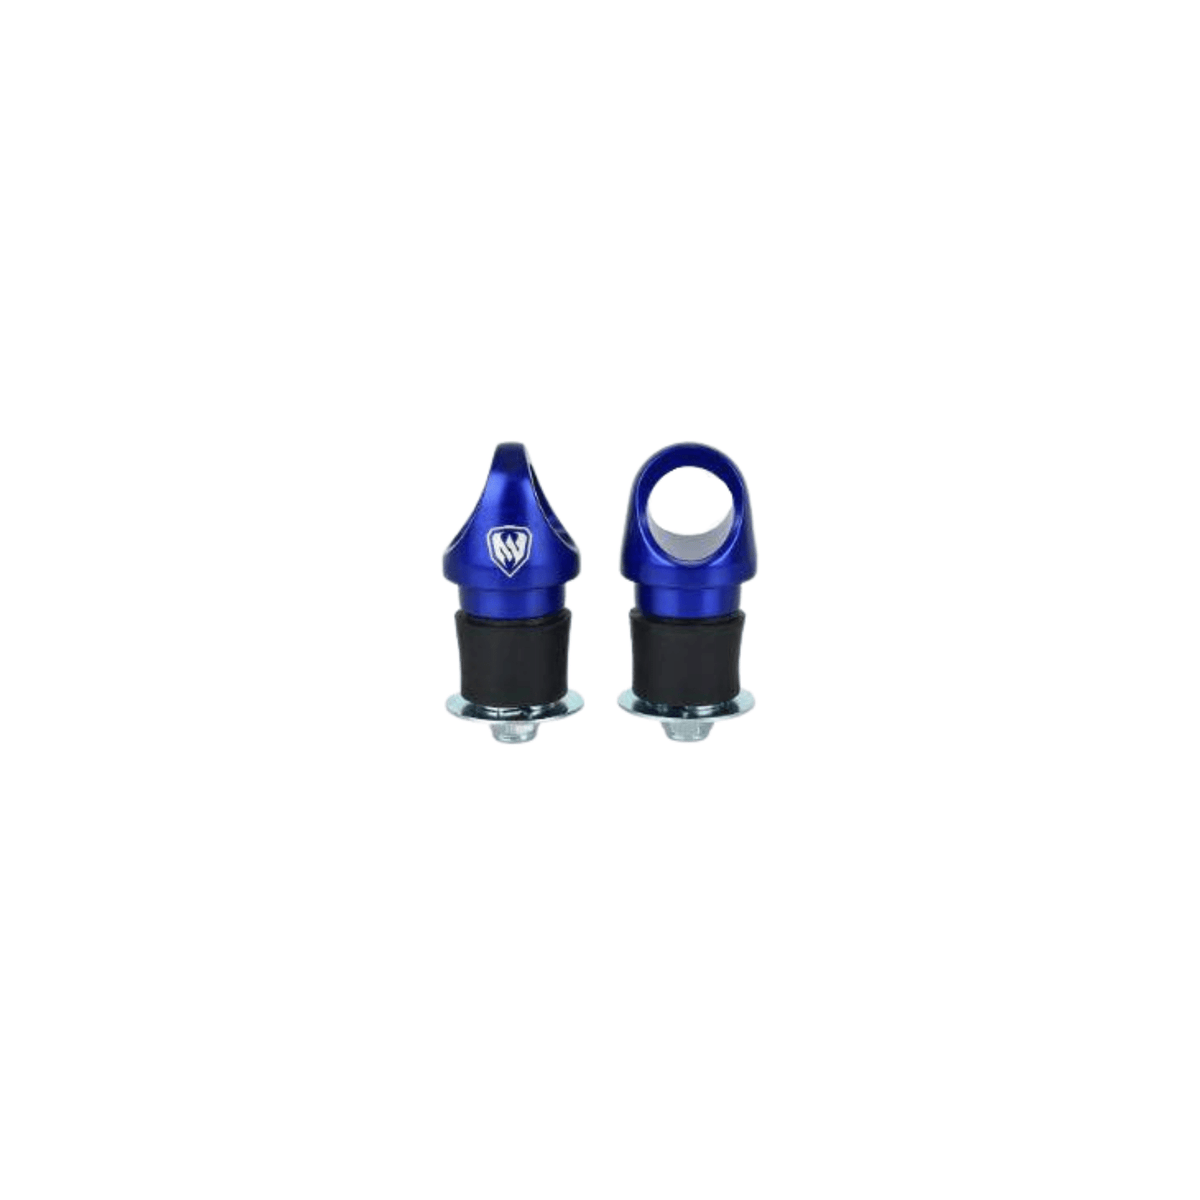 BILLET TURN LOCK ANCHORS FOR POLARIS LOCK AND RIDE HOLES (SET OF 2) - R1 Industries whips